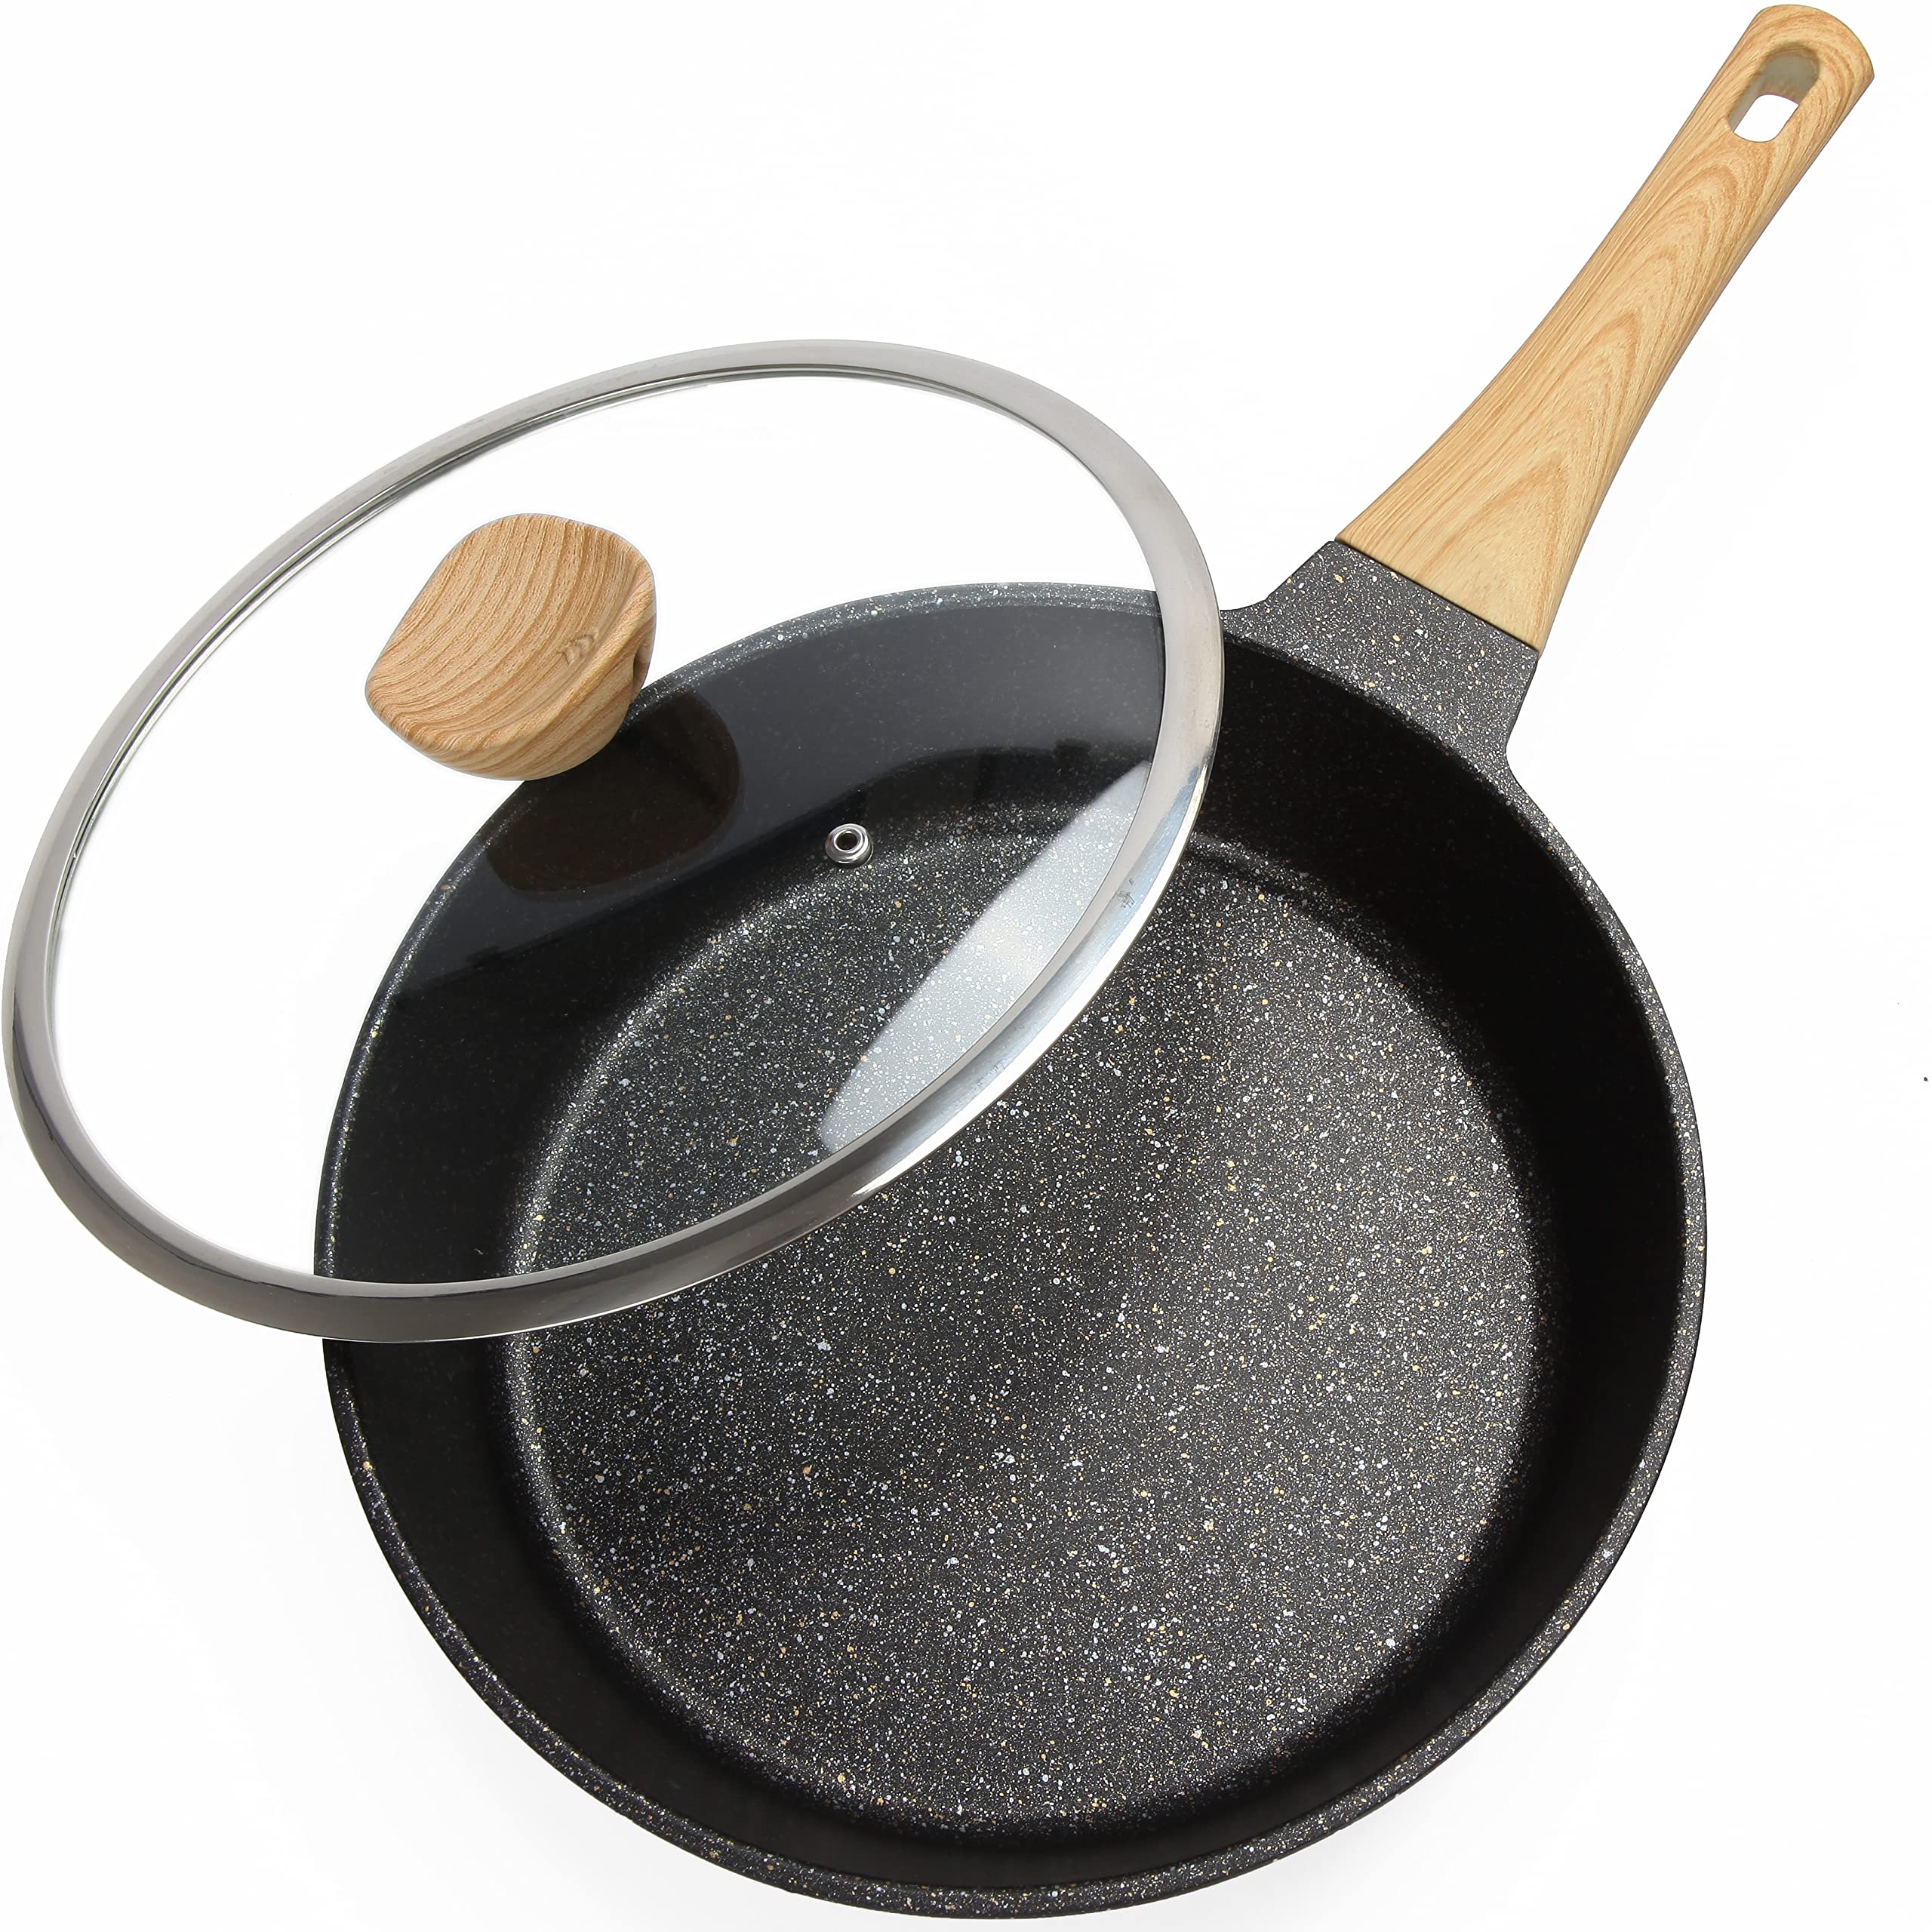 TAMASAKI 11 Inch Nonstick Medical Stone Skillet No Fumes Frying Pan Household Nonstick Cookware Stone-Derived Coating with Glass Lid Black